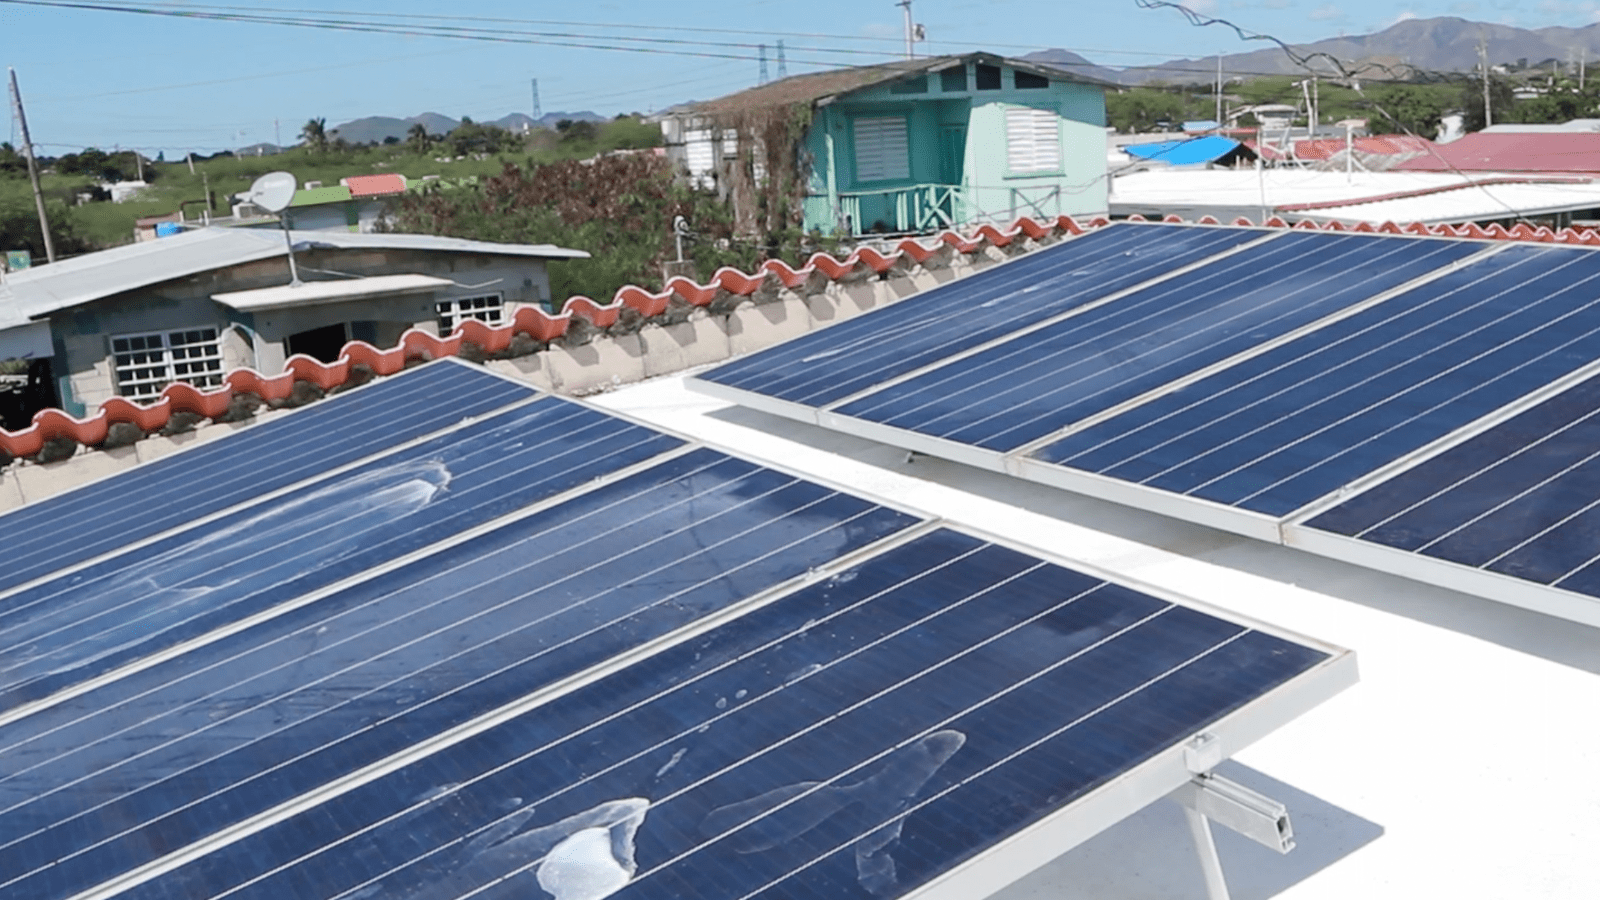 As fossil fuel plants face retirement, a Puerto Rico community pushes for rooftop solar